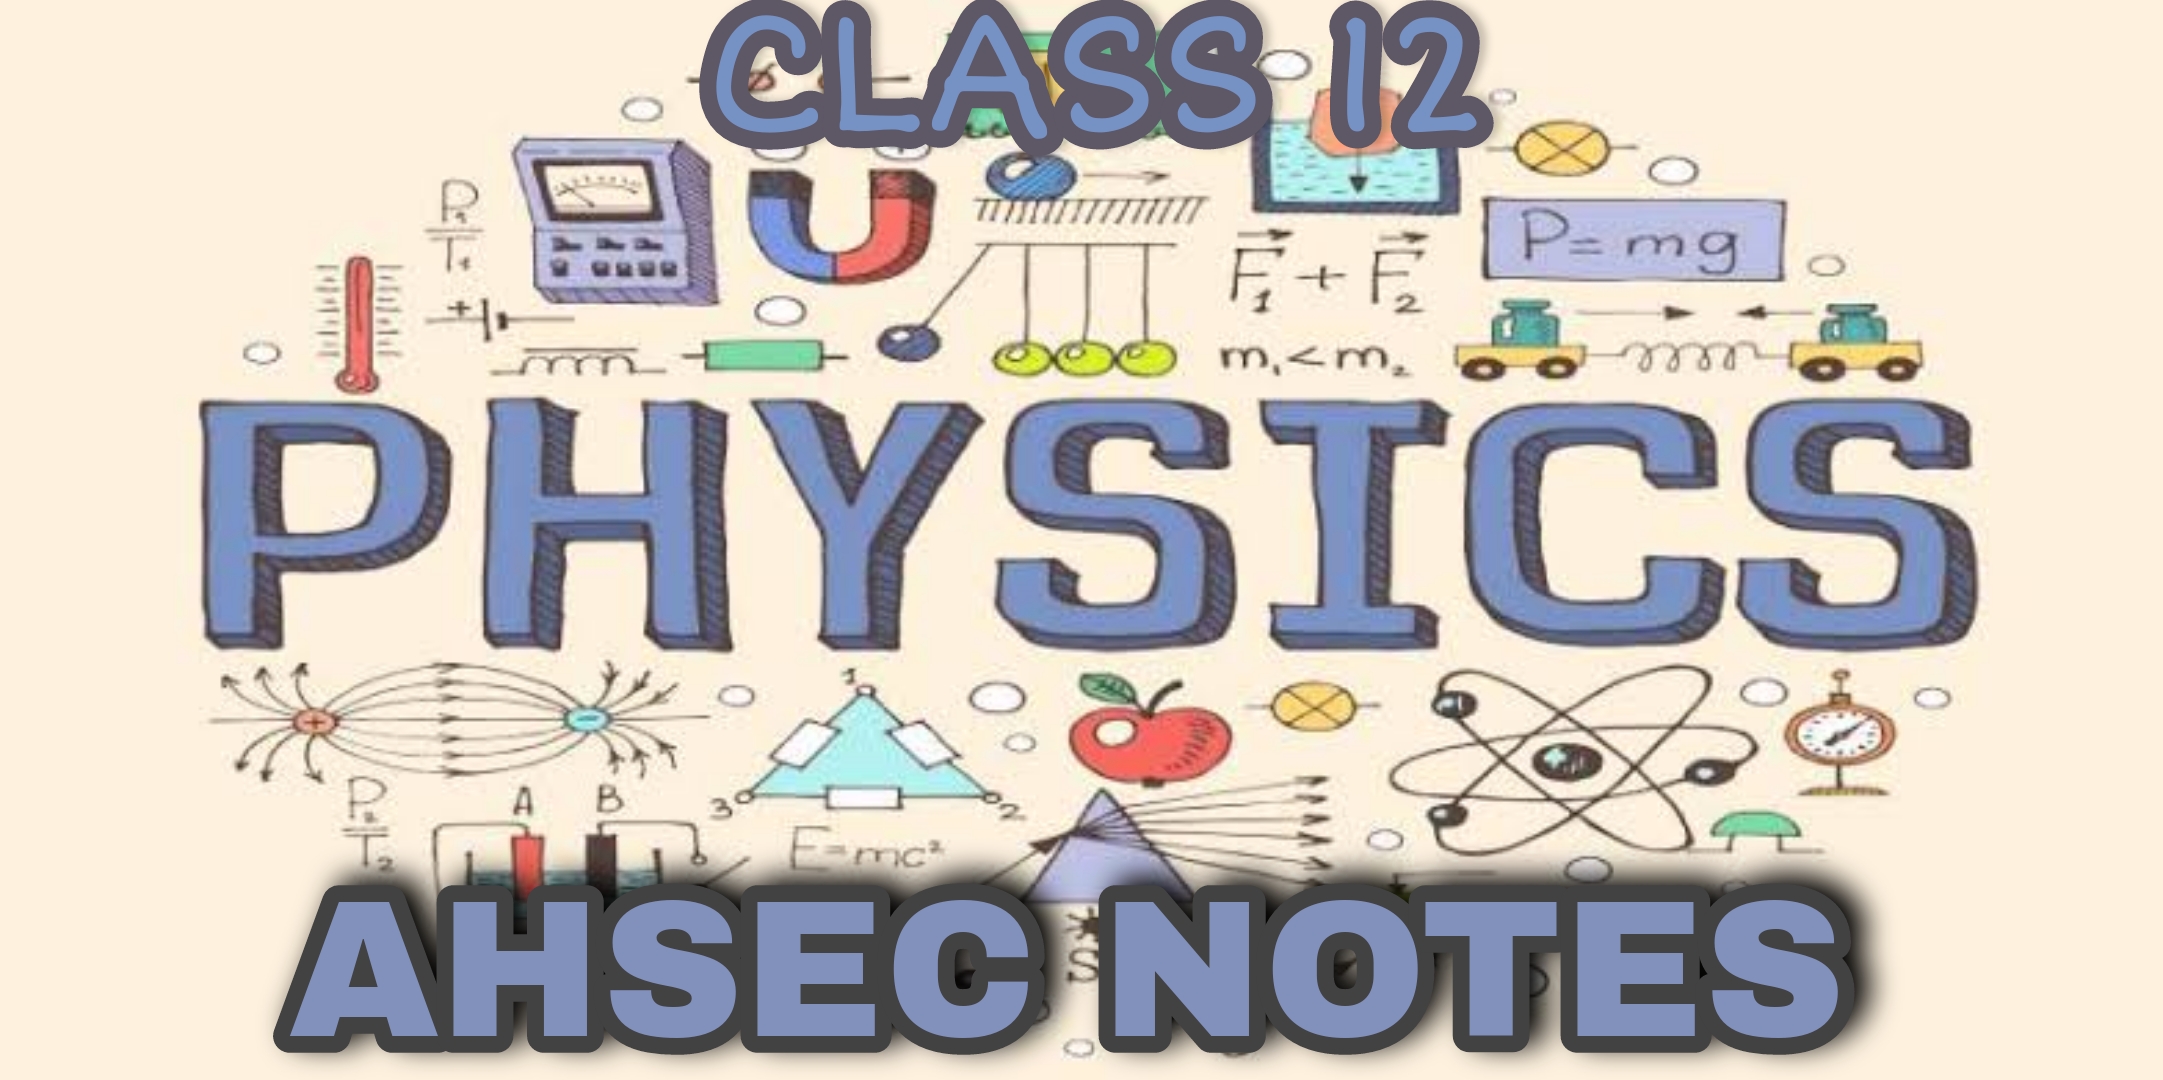 Class 12 Physics Solution, Ahsec physics solution for class 12, Class 12 physics solution ,Class 12 physics Hand made and hand written notes for ahsec